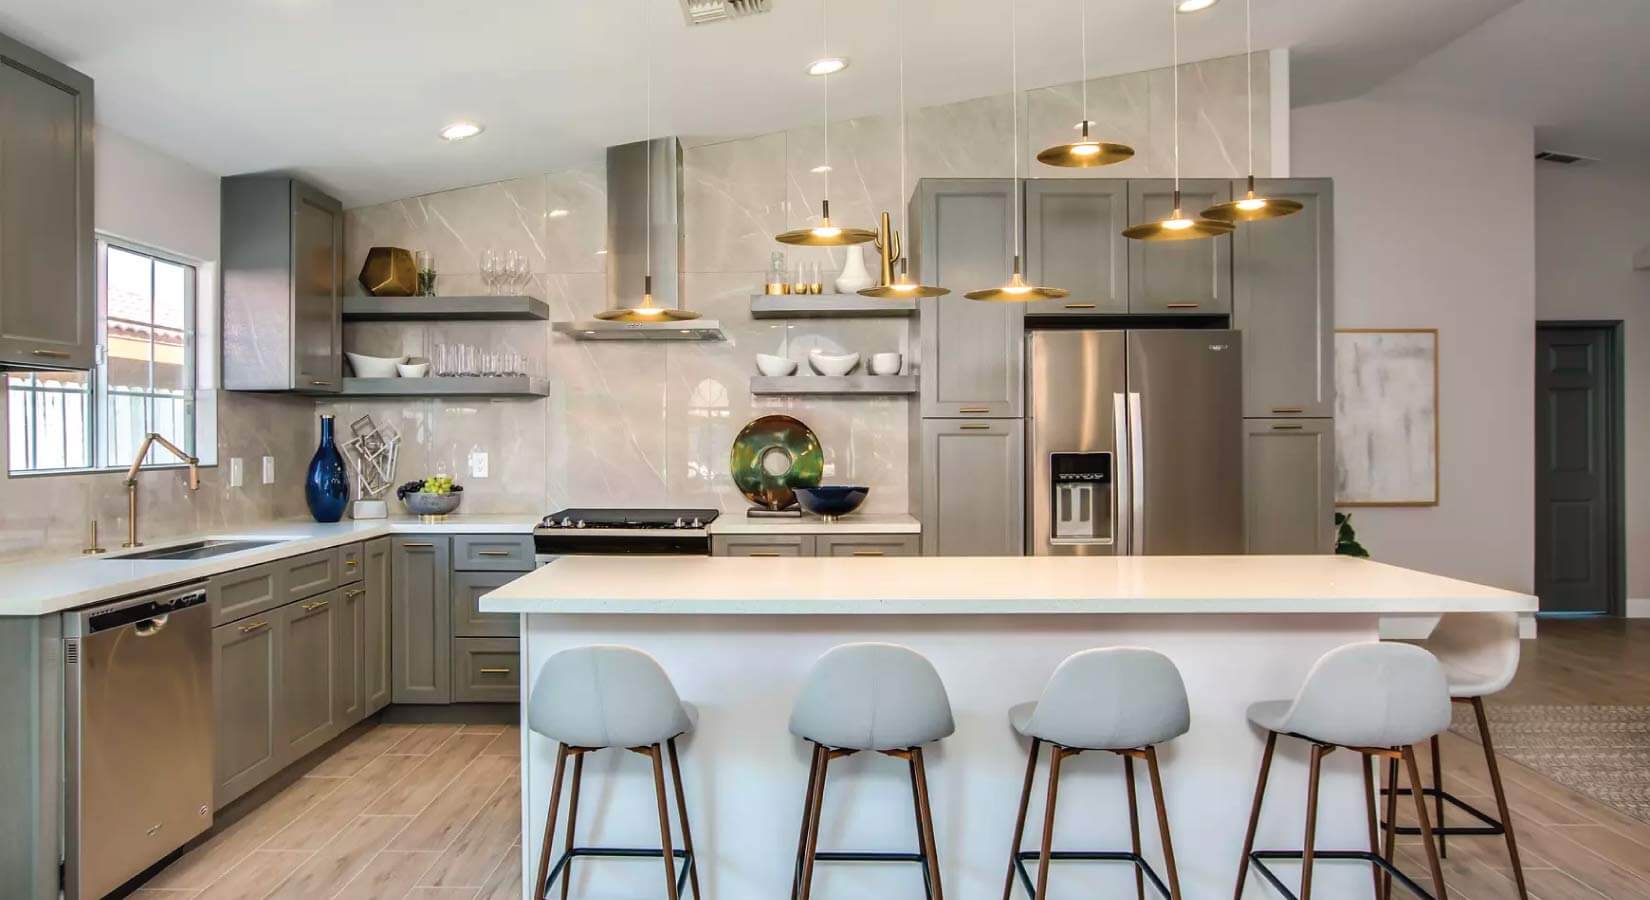 Gray shaker kitchen cabinets in modern kitchen with brass pendant lighting and marble backsplash.